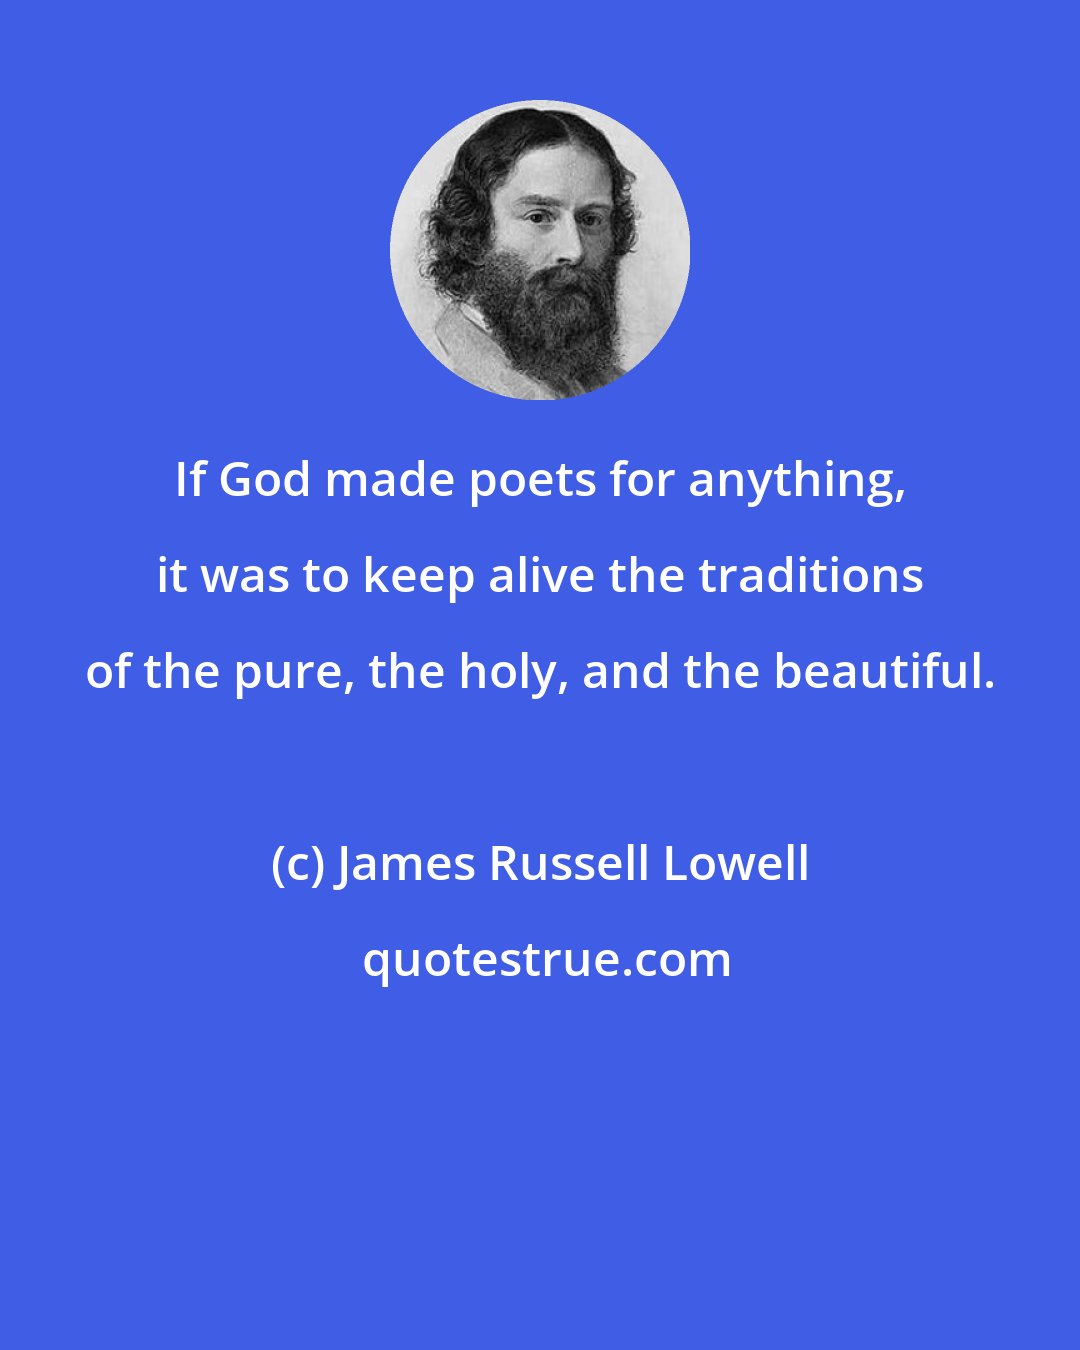 James Russell Lowell: If God made poets for anything, it was to keep alive the traditions of the pure, the holy, and the beautiful.